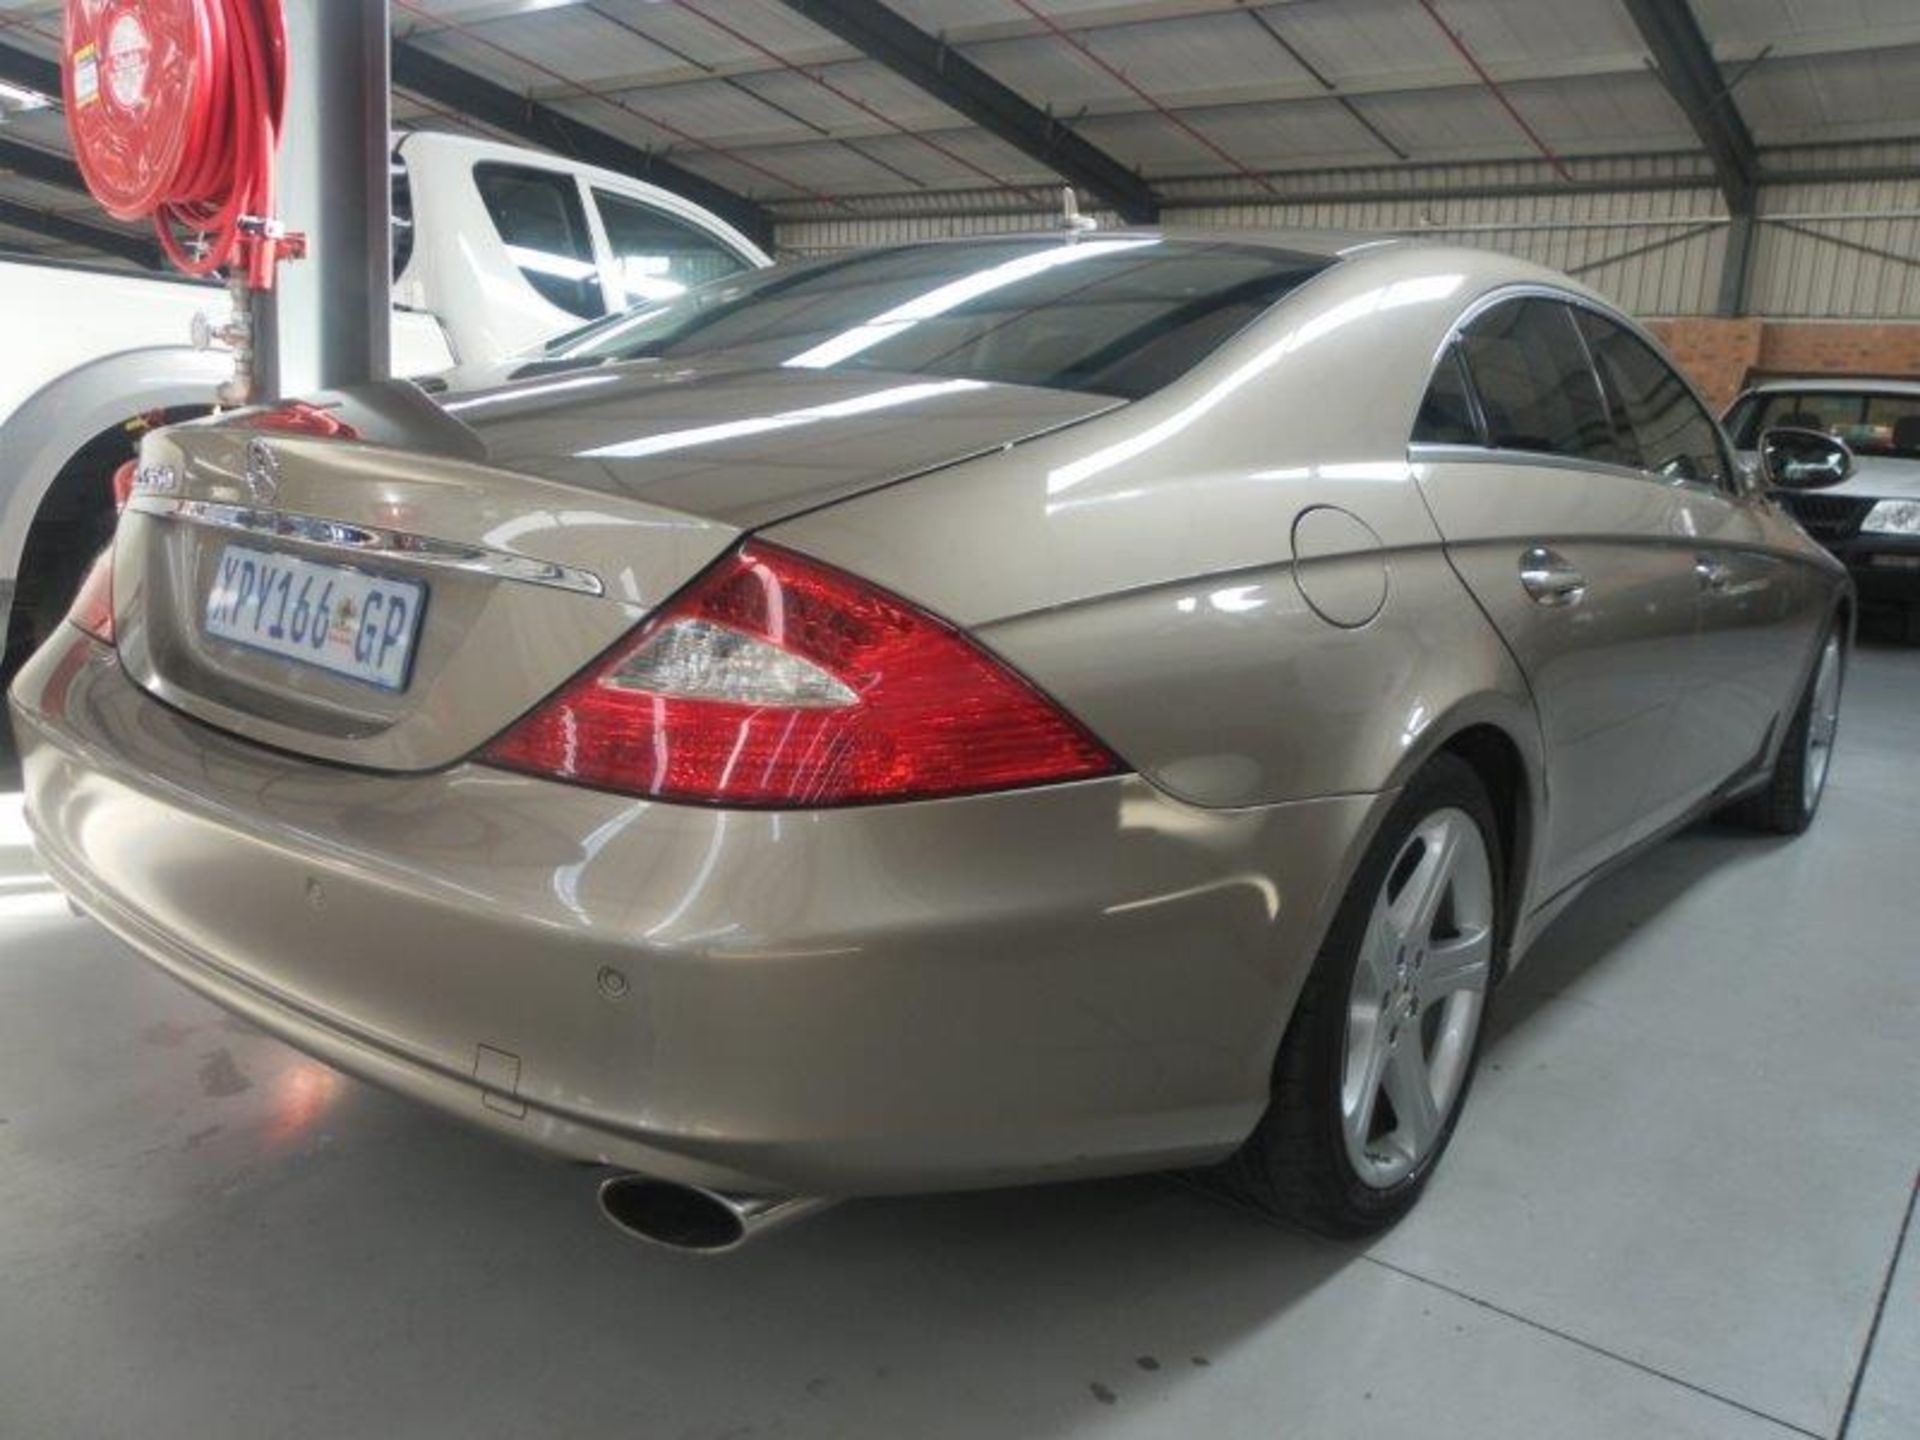 2008 XPY166GP Mercedes-Benz Cls350 Auto (Vin No: WDD2193562A135151 )(219140 kms) - Image 3 of 5